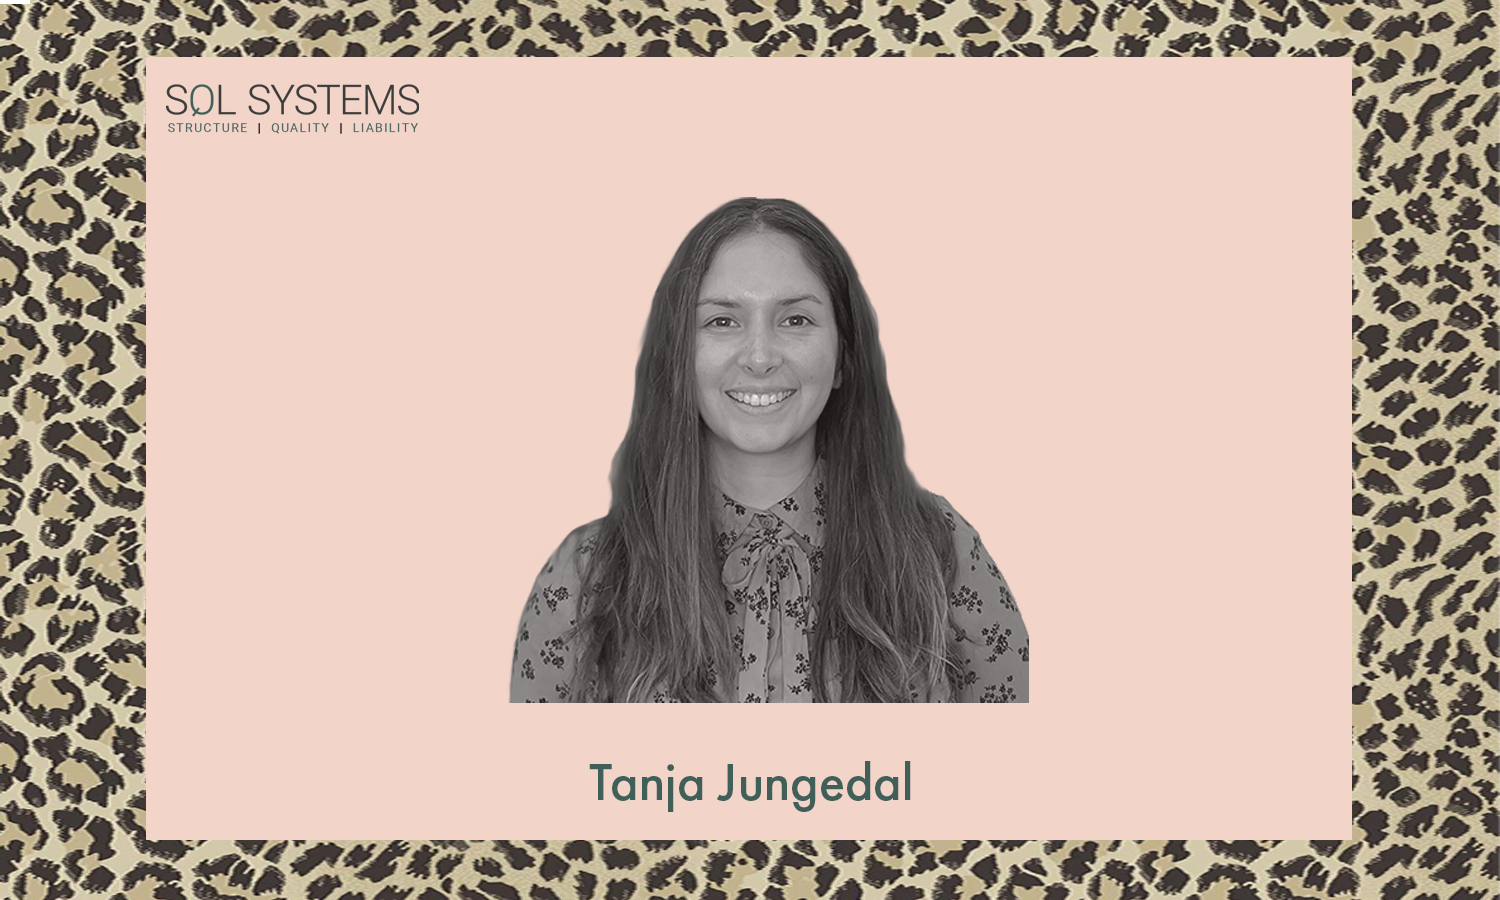 Tanja_Jungedal_SQL_Systems